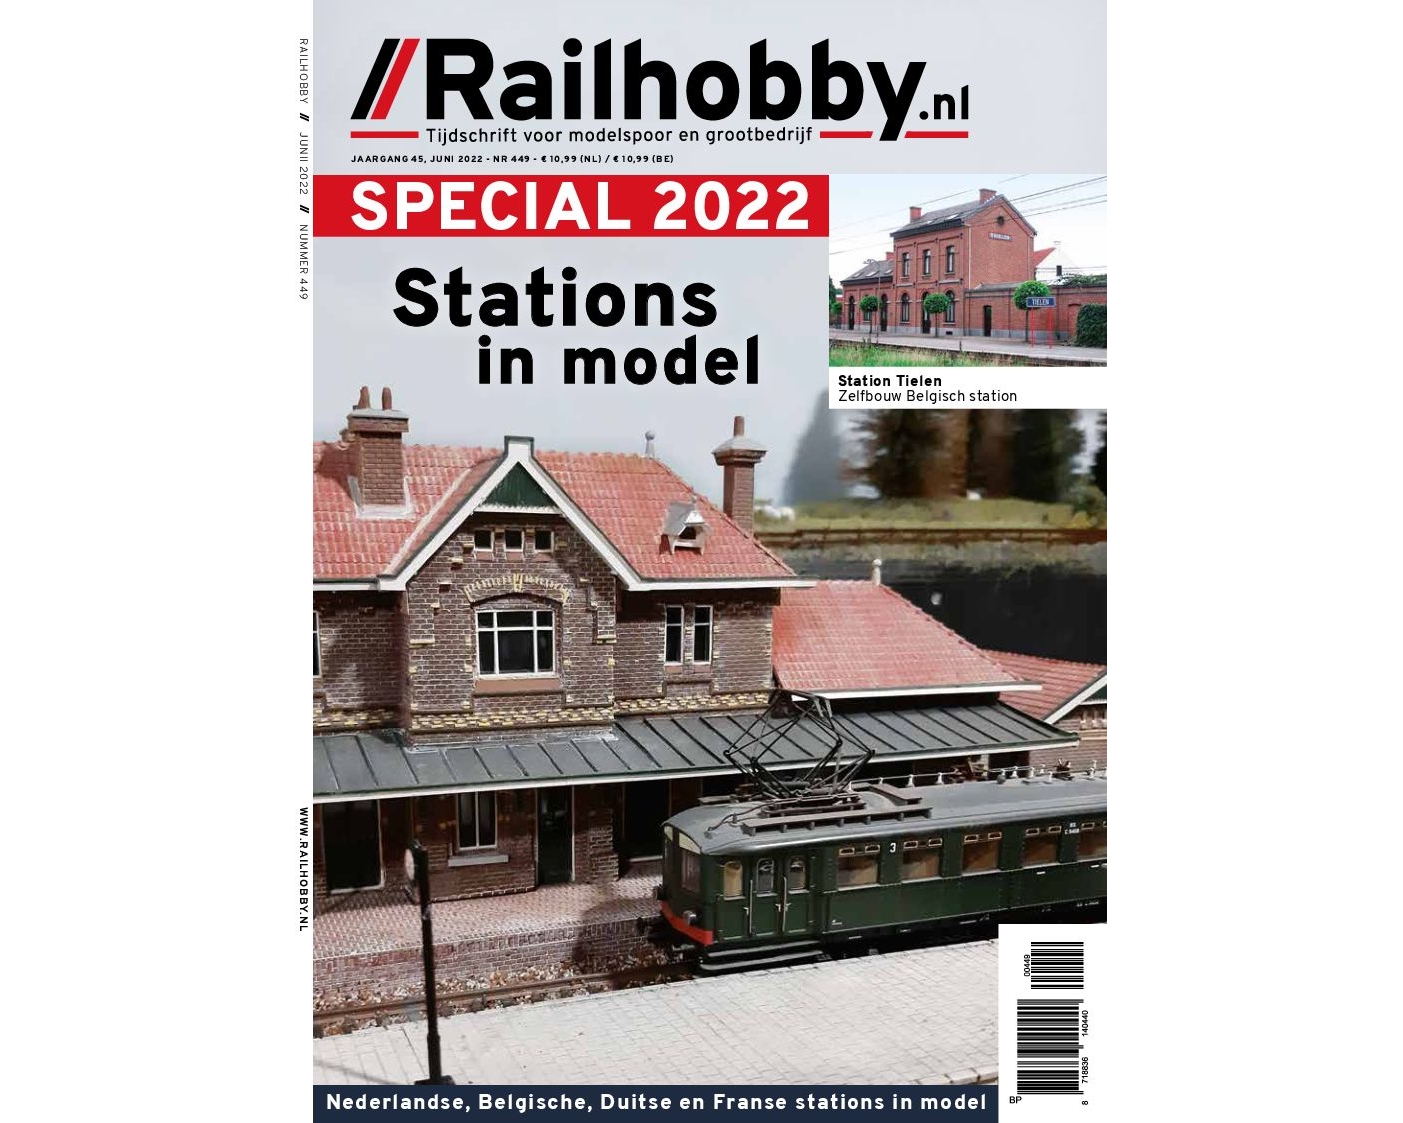 RAILHOBBY SPECIAL 2022 STATIONS IN MODEL